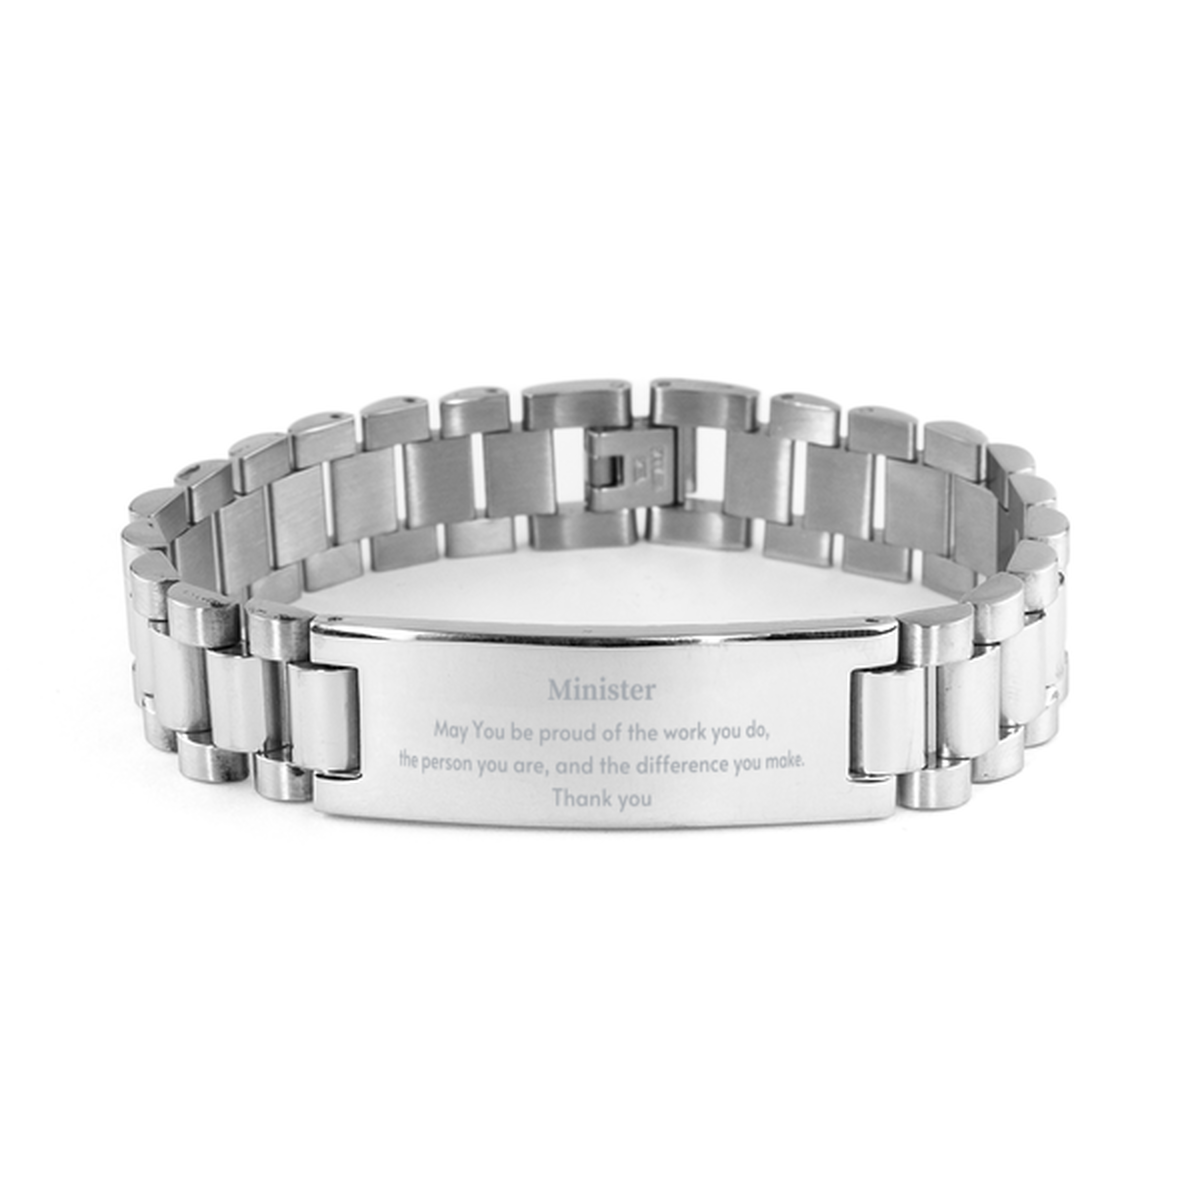 Heartwarming Ladder Stainless Steel Bracelet Retirement Coworkers Gifts for Minister, Minister May You be proud of the work you do, the person you are Gifts for Boss Men Women Friends